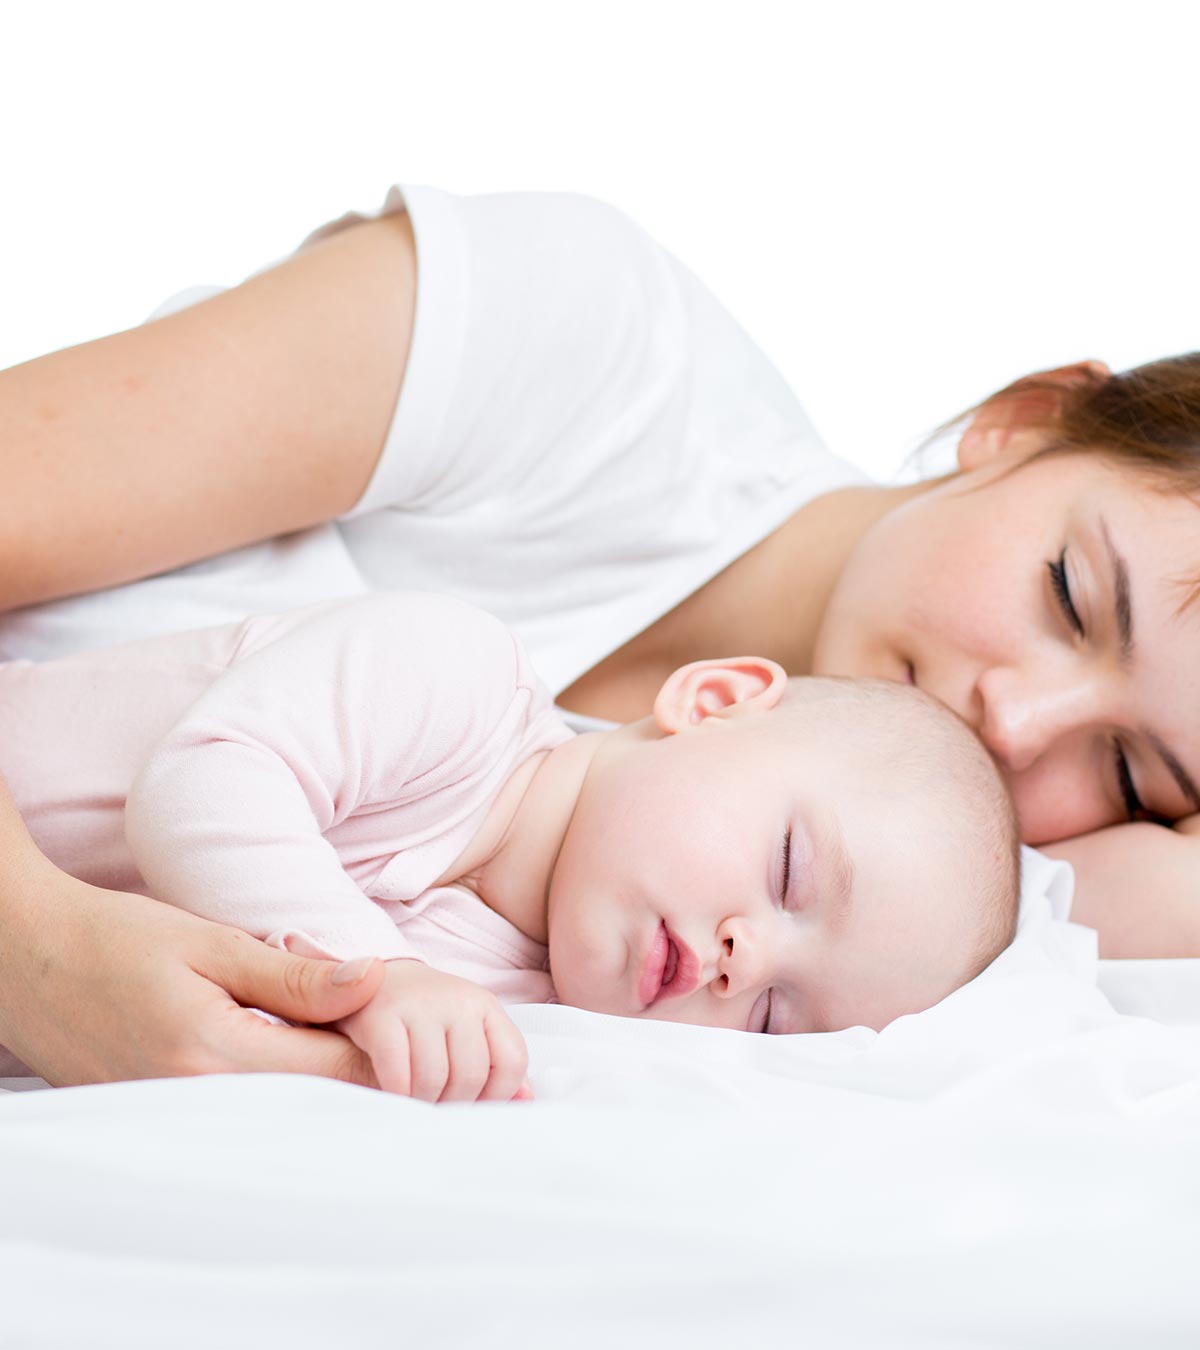 Mother Co-sleeping With Her Baby In Bed